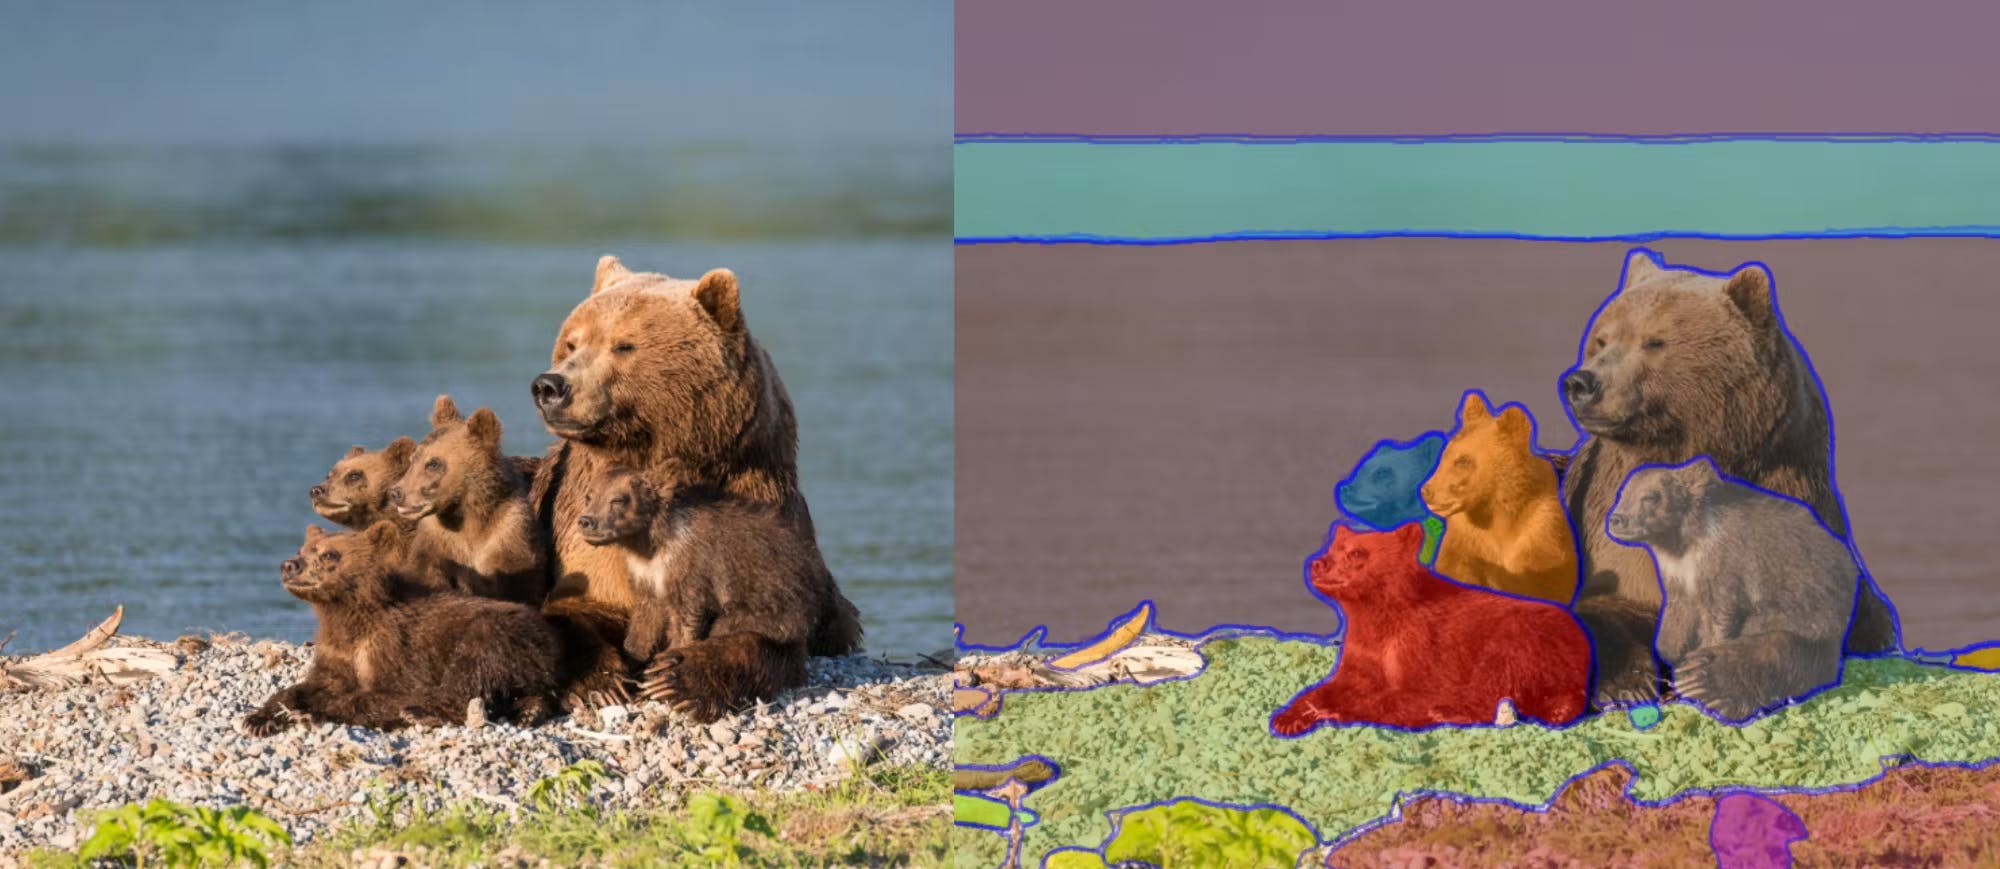 Image showing the output of a SAM segmented image of a bear mom and her cubs.